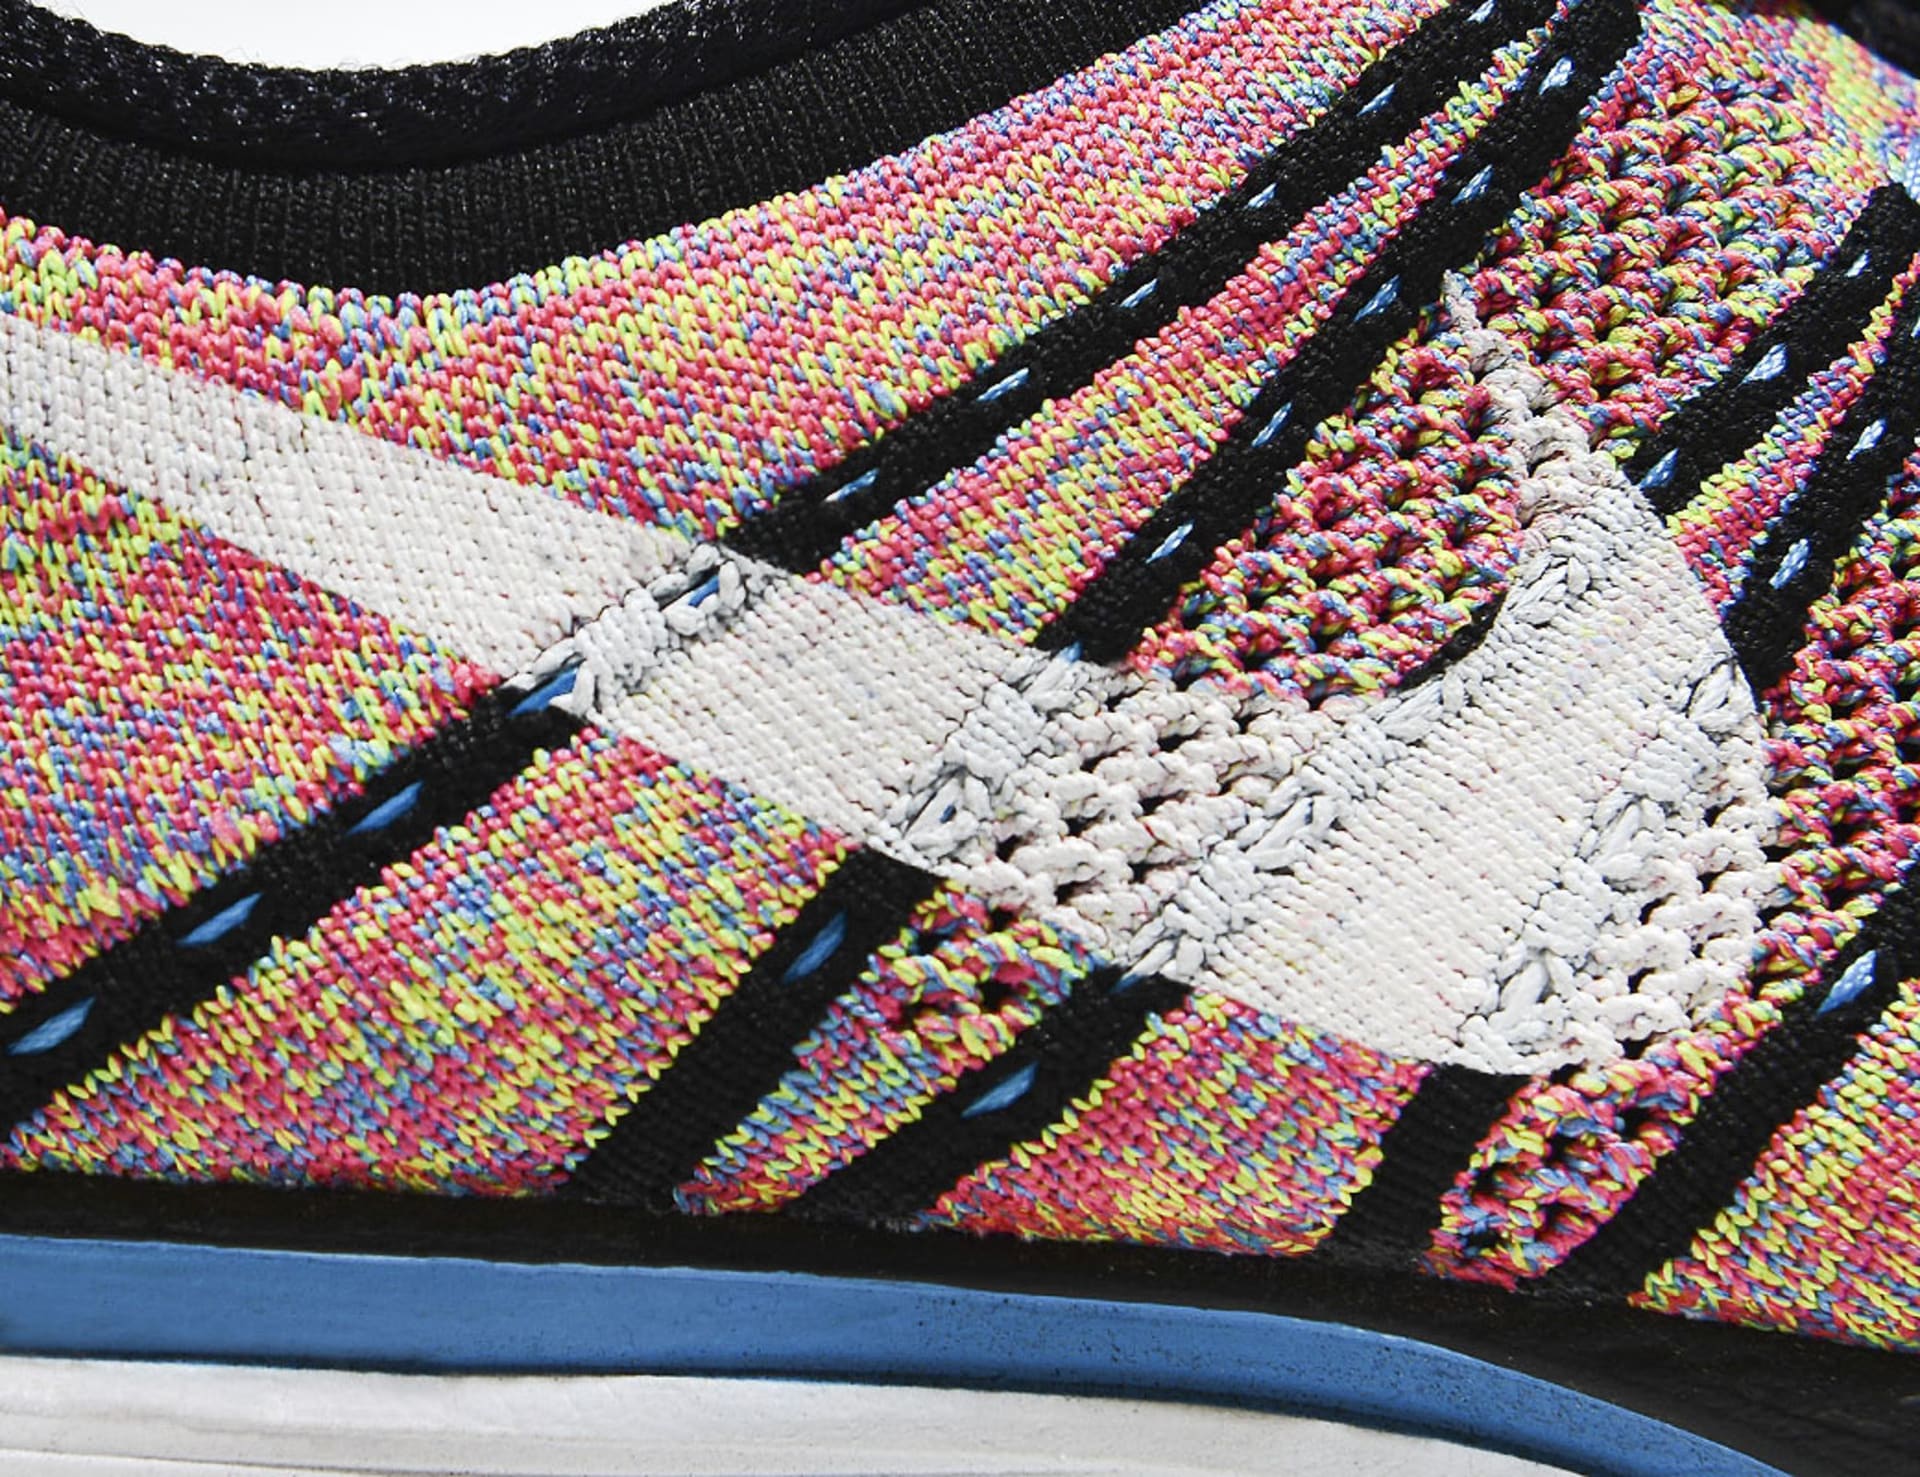 Nike Flyknit Is the Stylish and Innovative Sneaker Technology Today | Complex